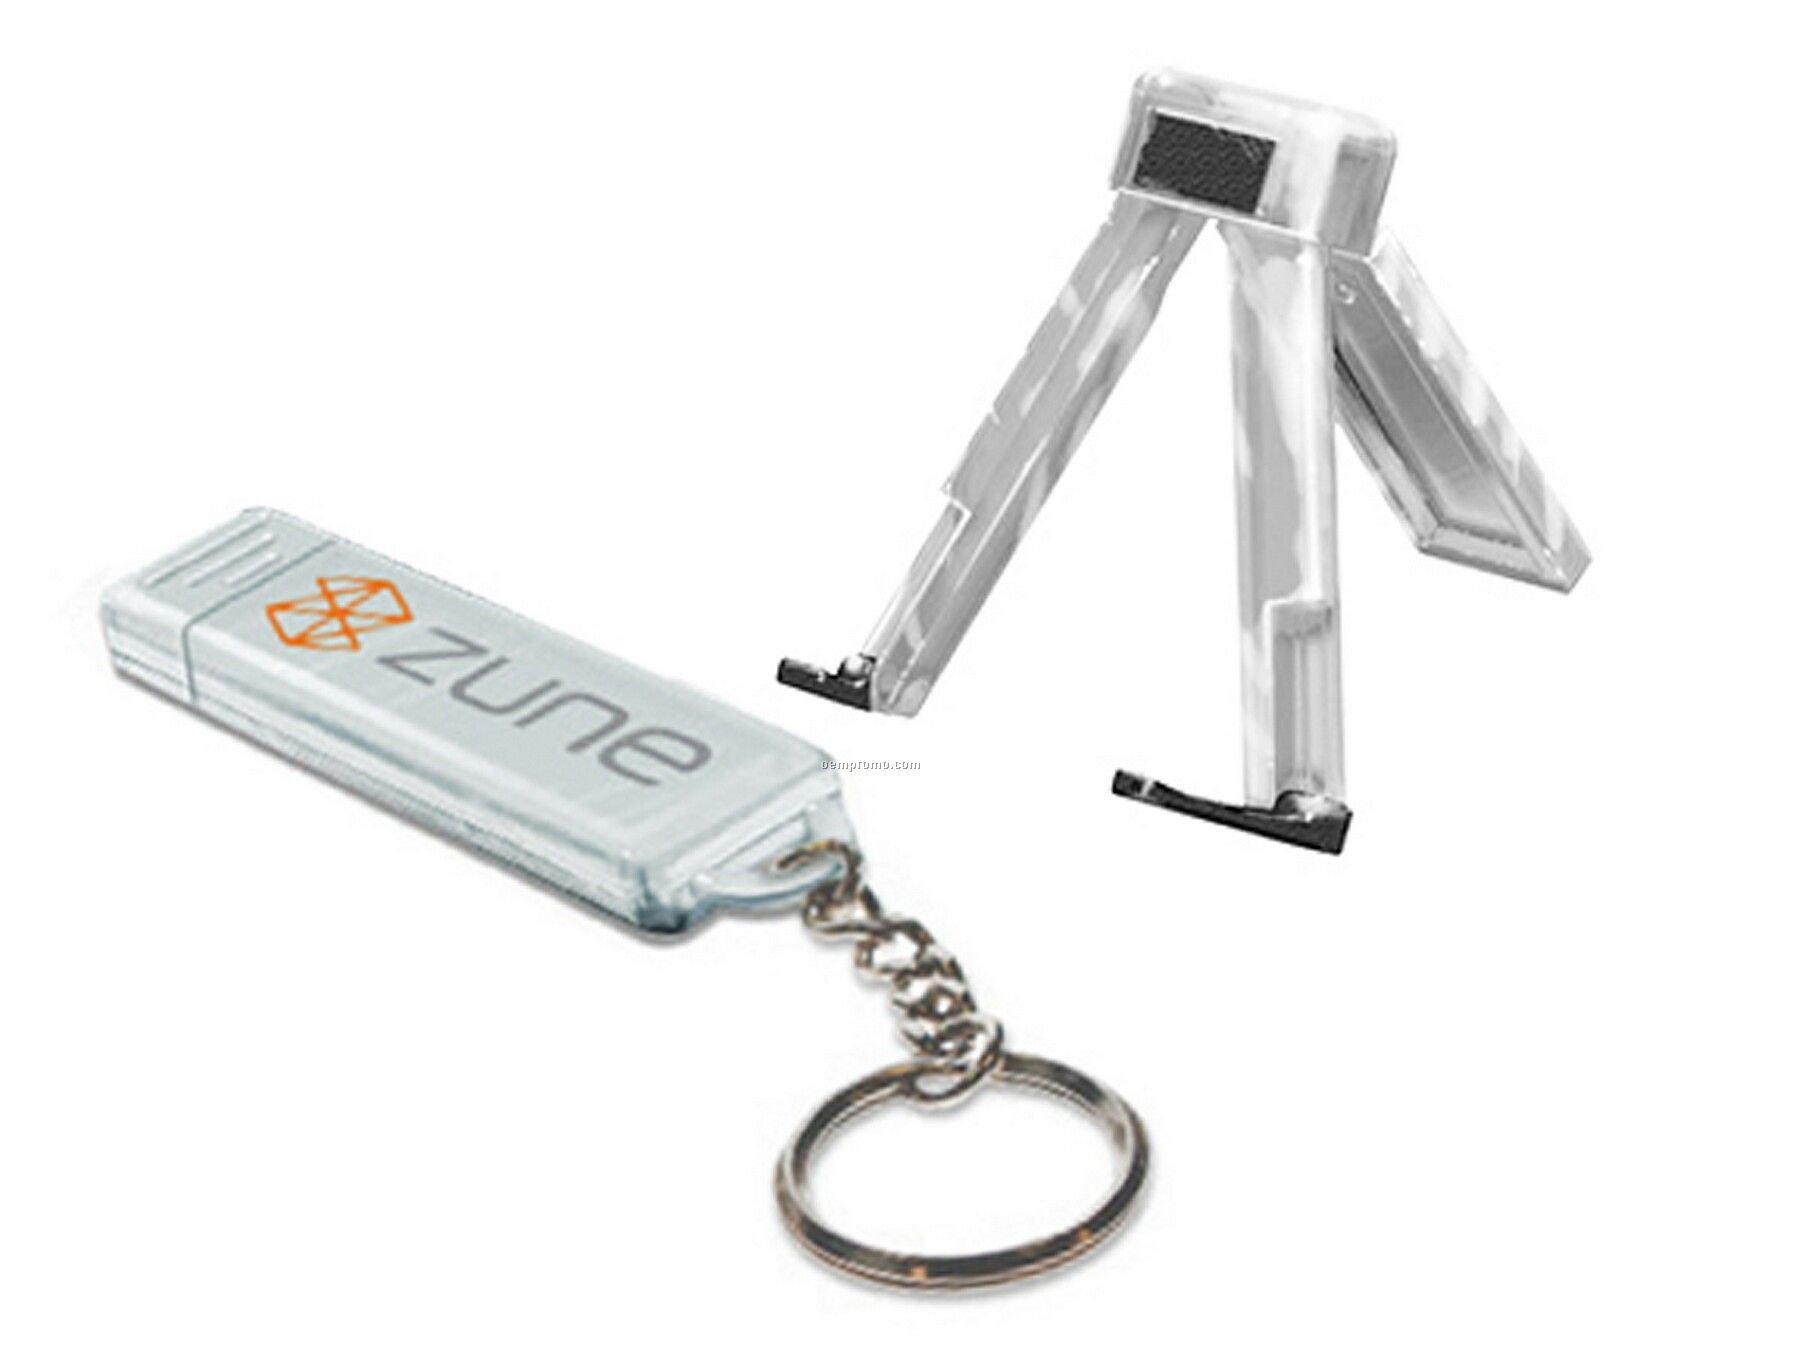 Tripod Stand Keychain For Phones And Mp3 Players